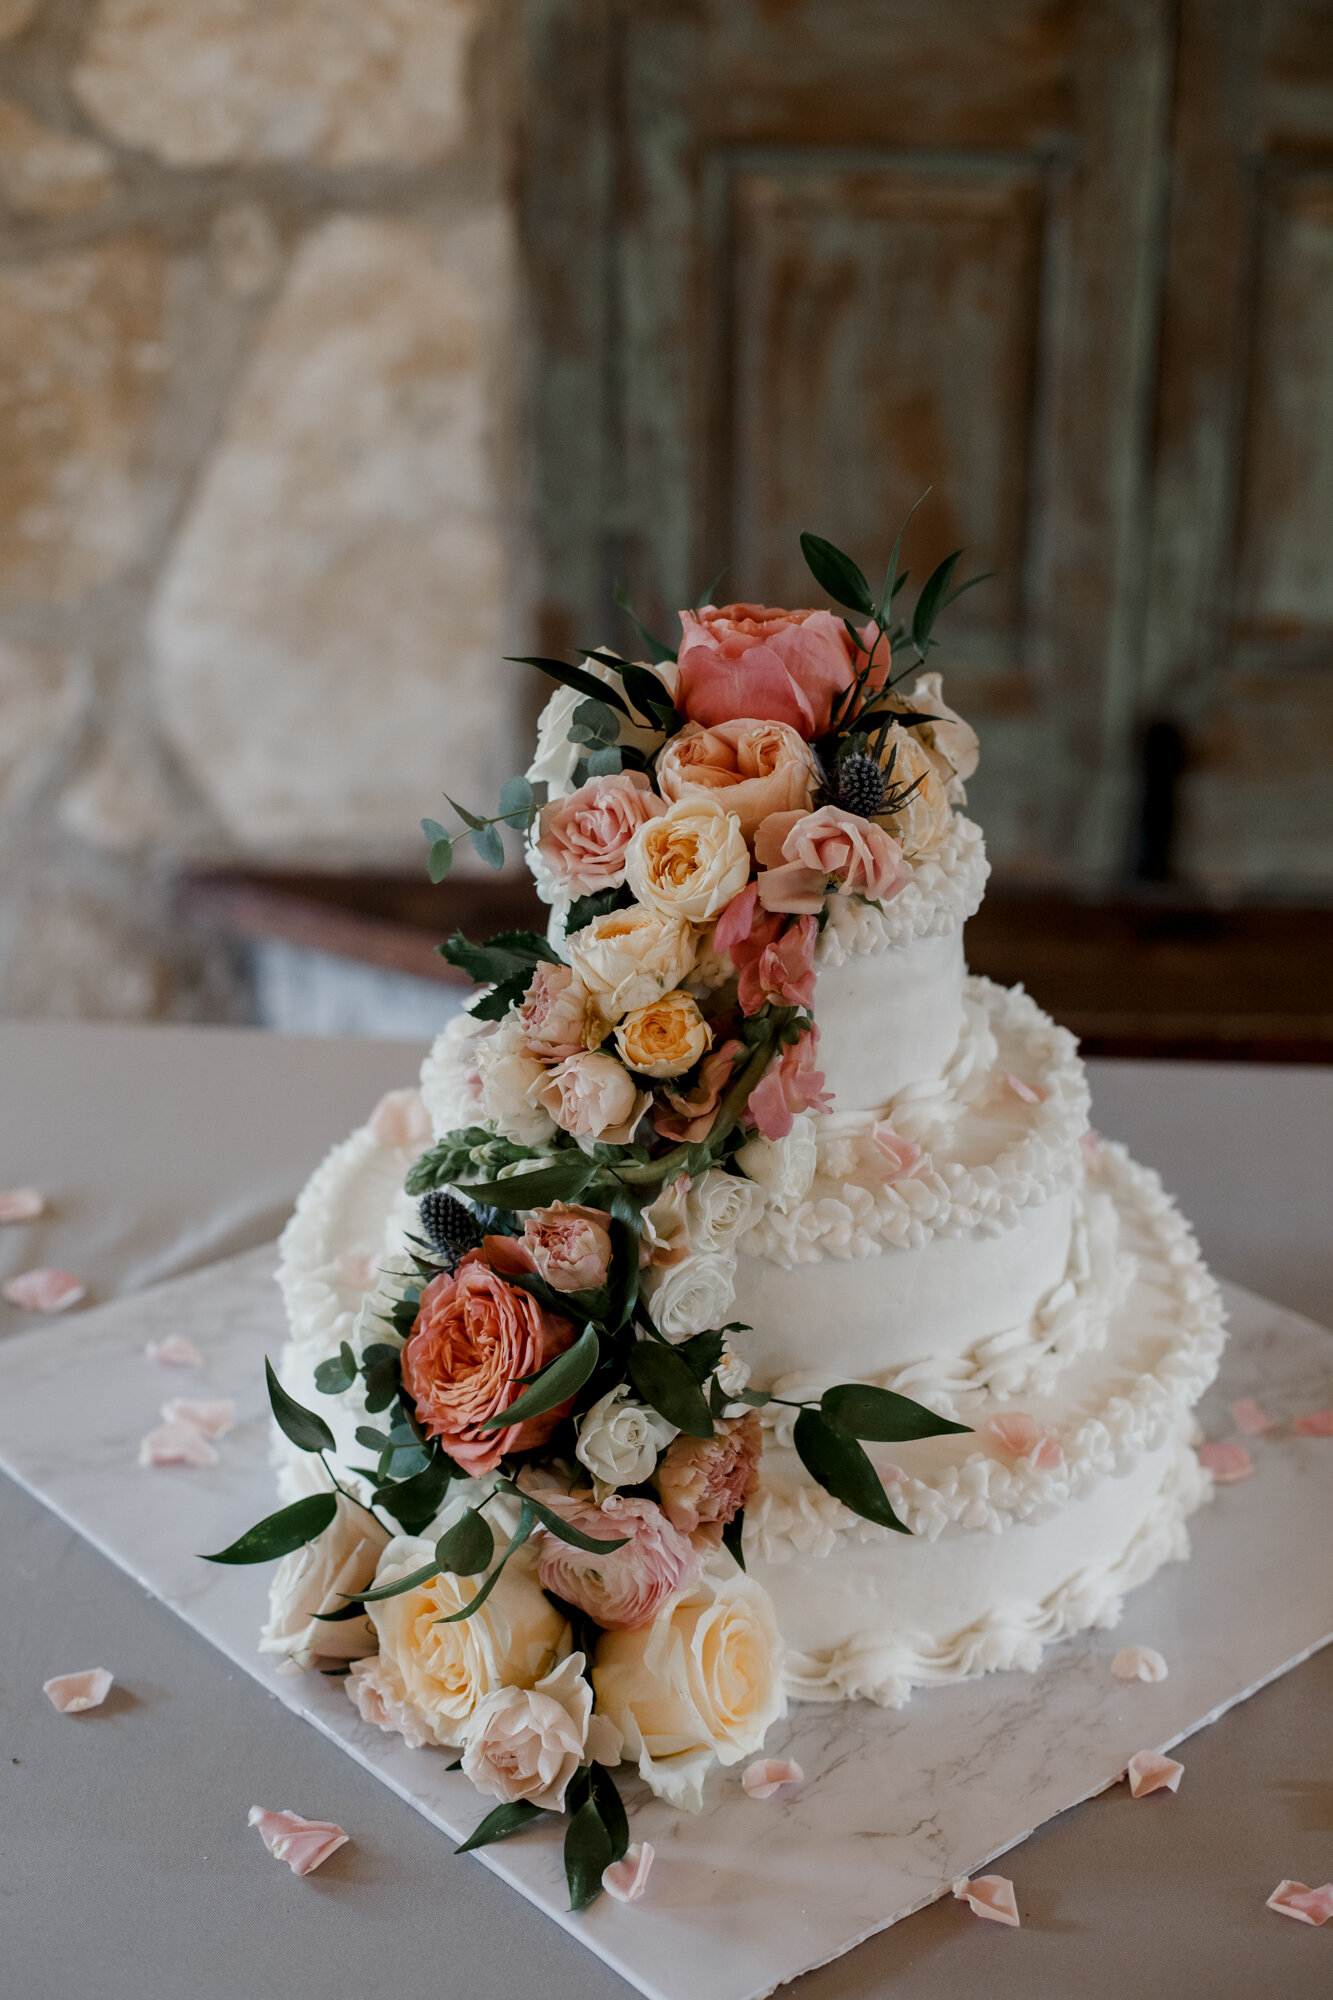 Cake decoration details. Romantic Chic Country Wedding at Rustic Luxury Balmorhea Events&nbsp;Venue in Magnolia, TX